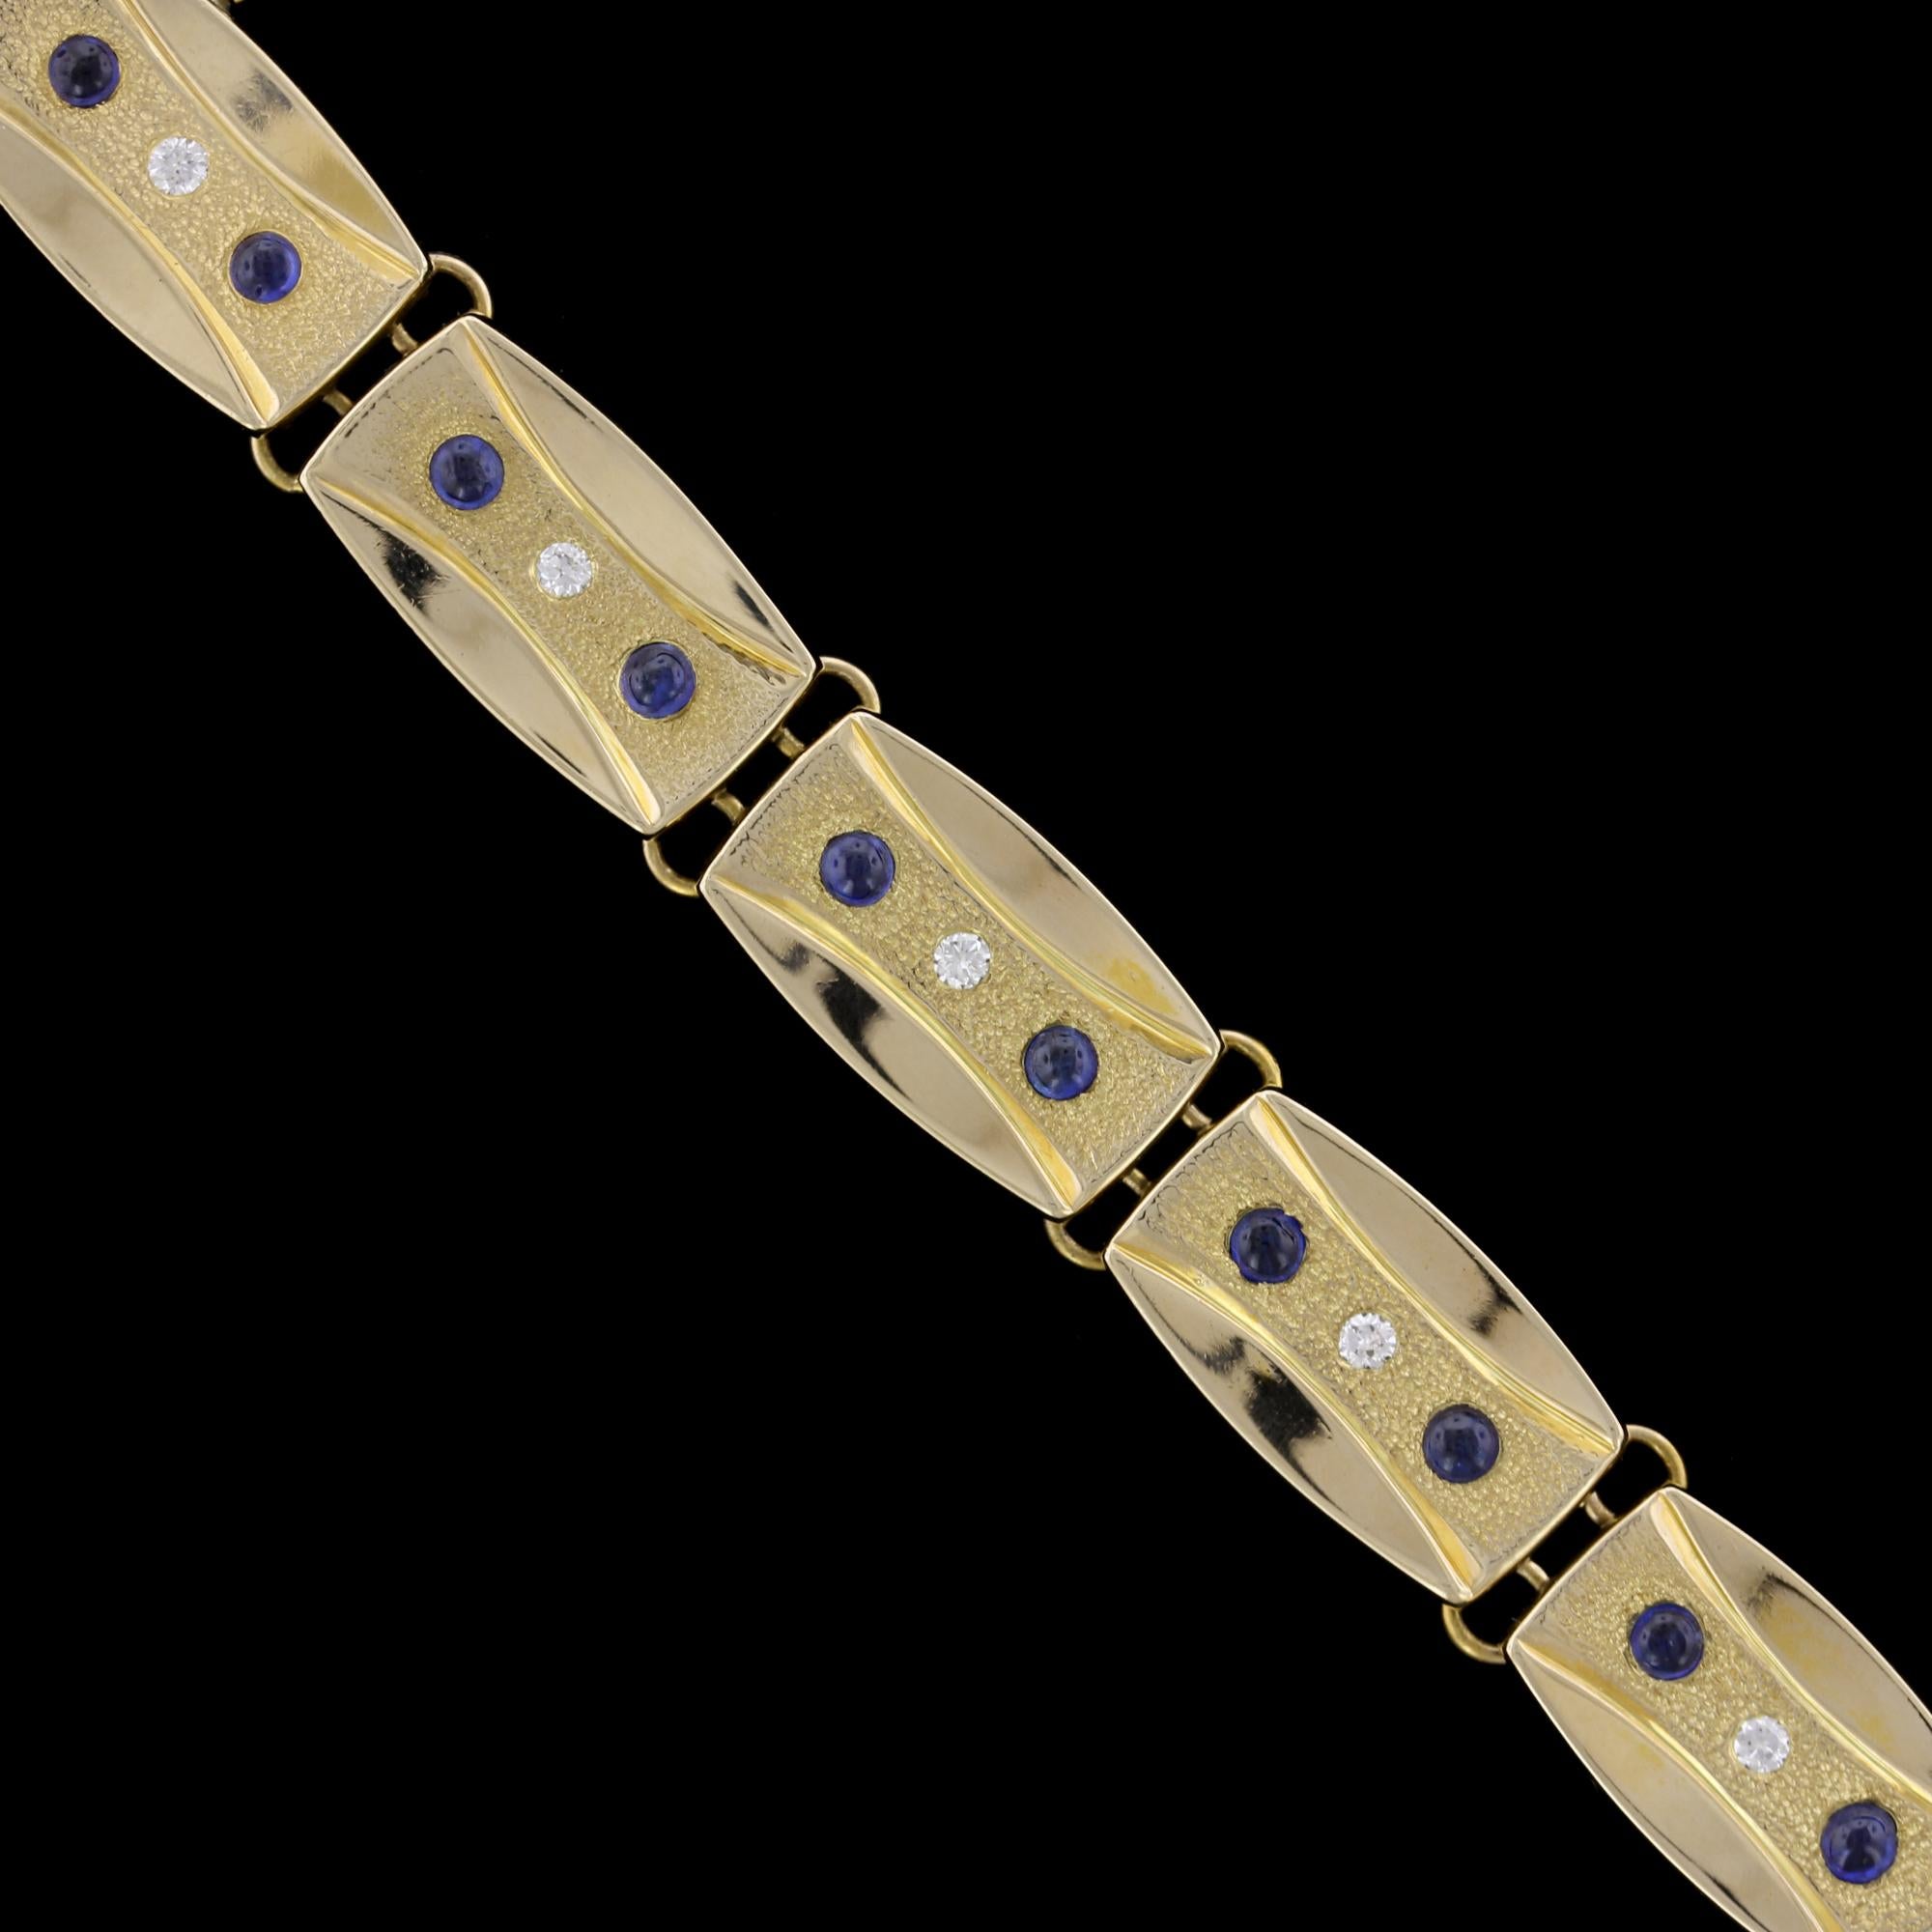 Potter & Mellen 14K Yellow Gold Sapphire and Diamond Bracelet. The bracelet is designed with textured and polished links flush set with 18 cabochon sapphires, approx. total wt. 1.00cts., and nine full cut diamonds, approx. total wt.  .27cts., I